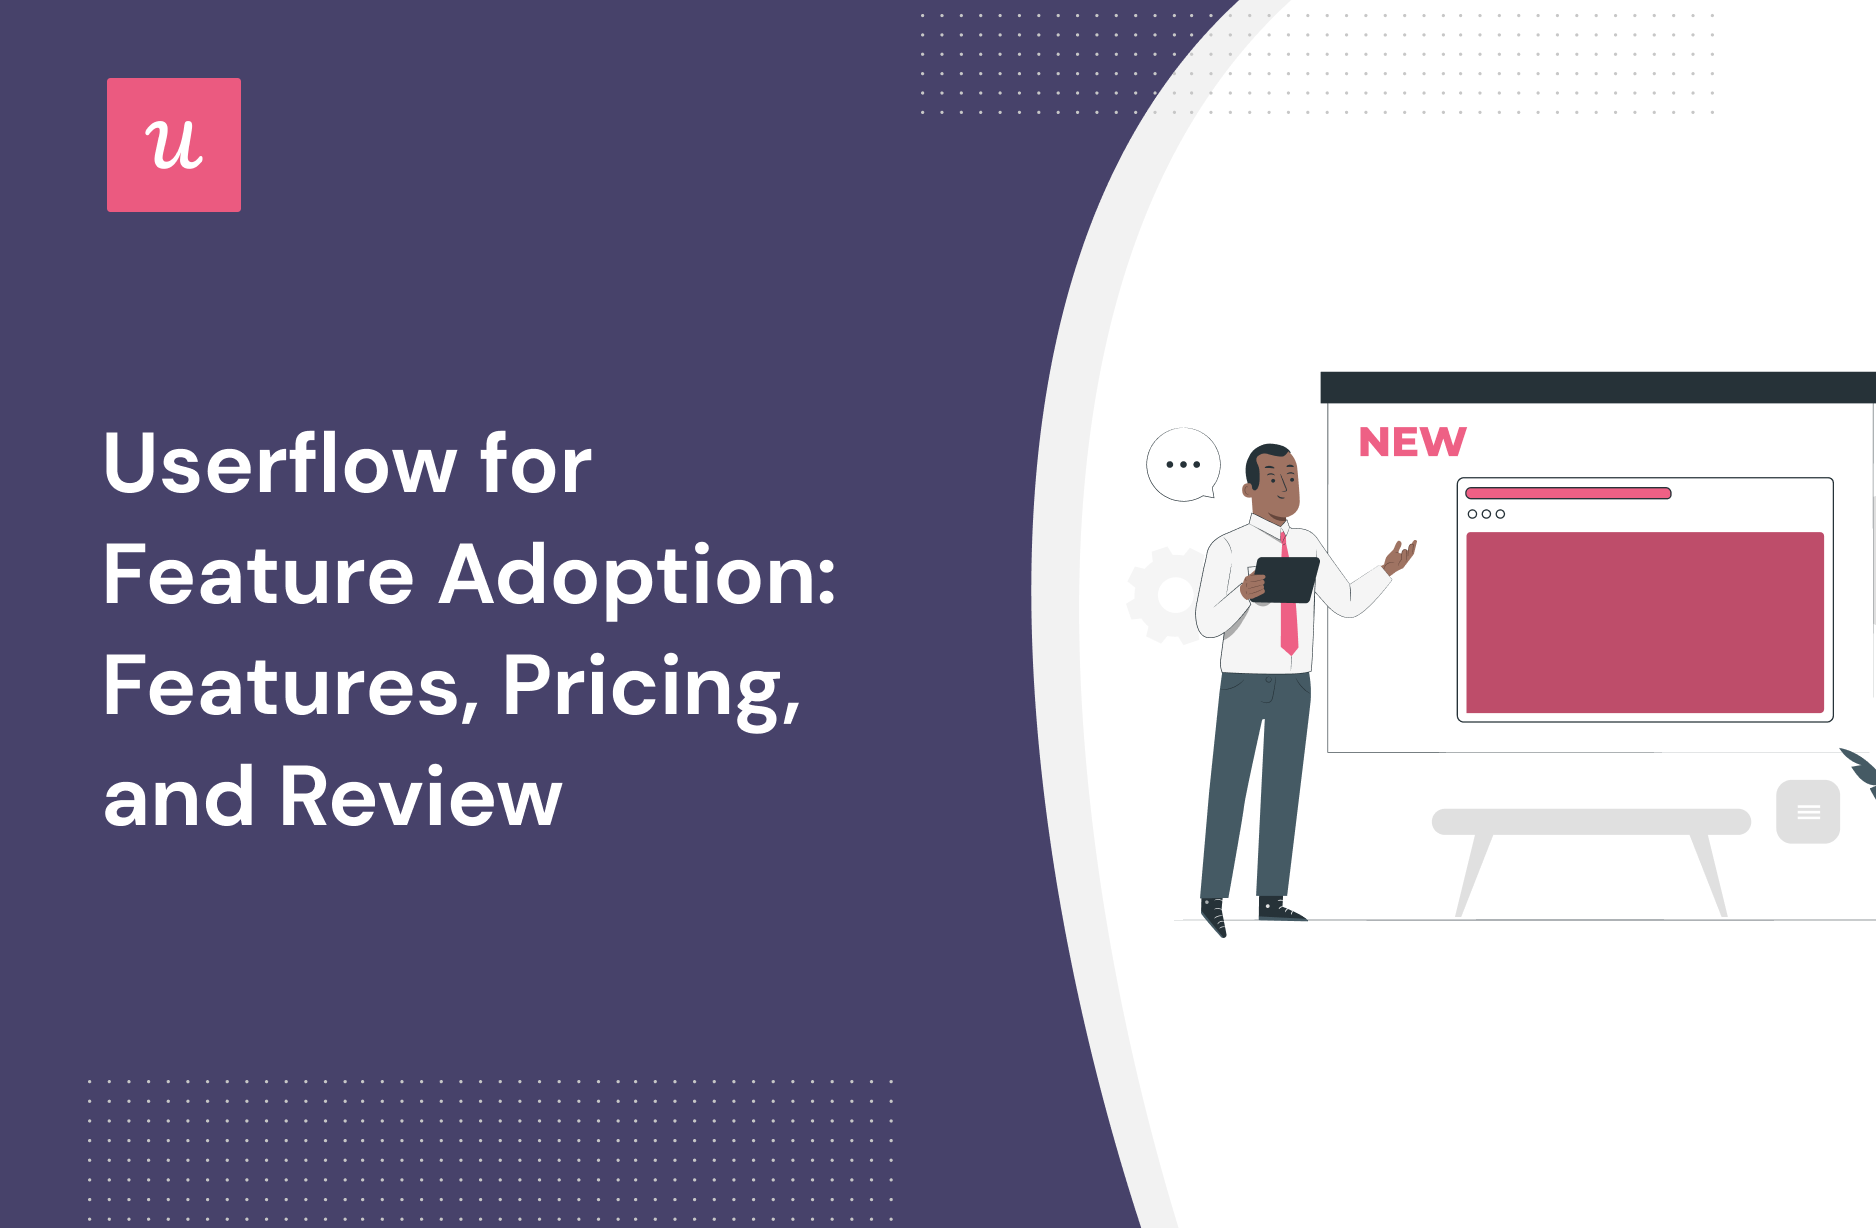 Userflow for Feature Adoption: Features, Pricing, and Review